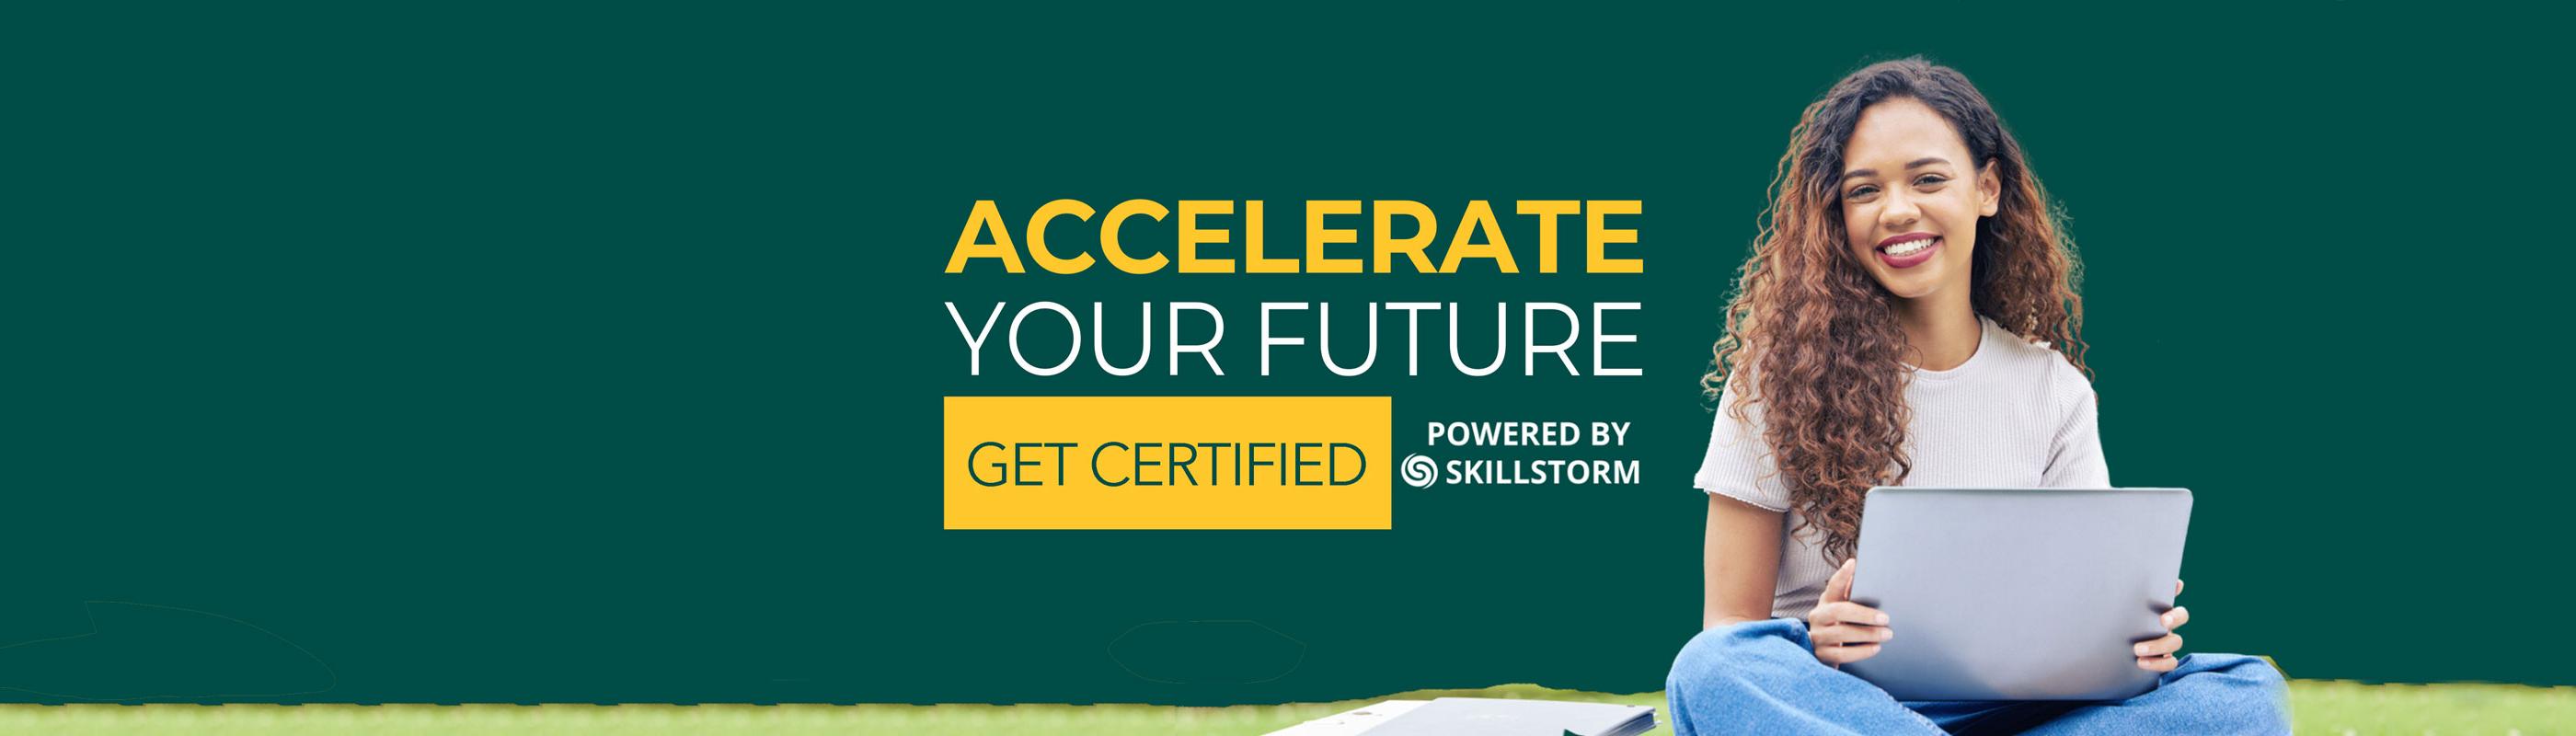 Accelerate your future - get certified. Powered by SkillStorm